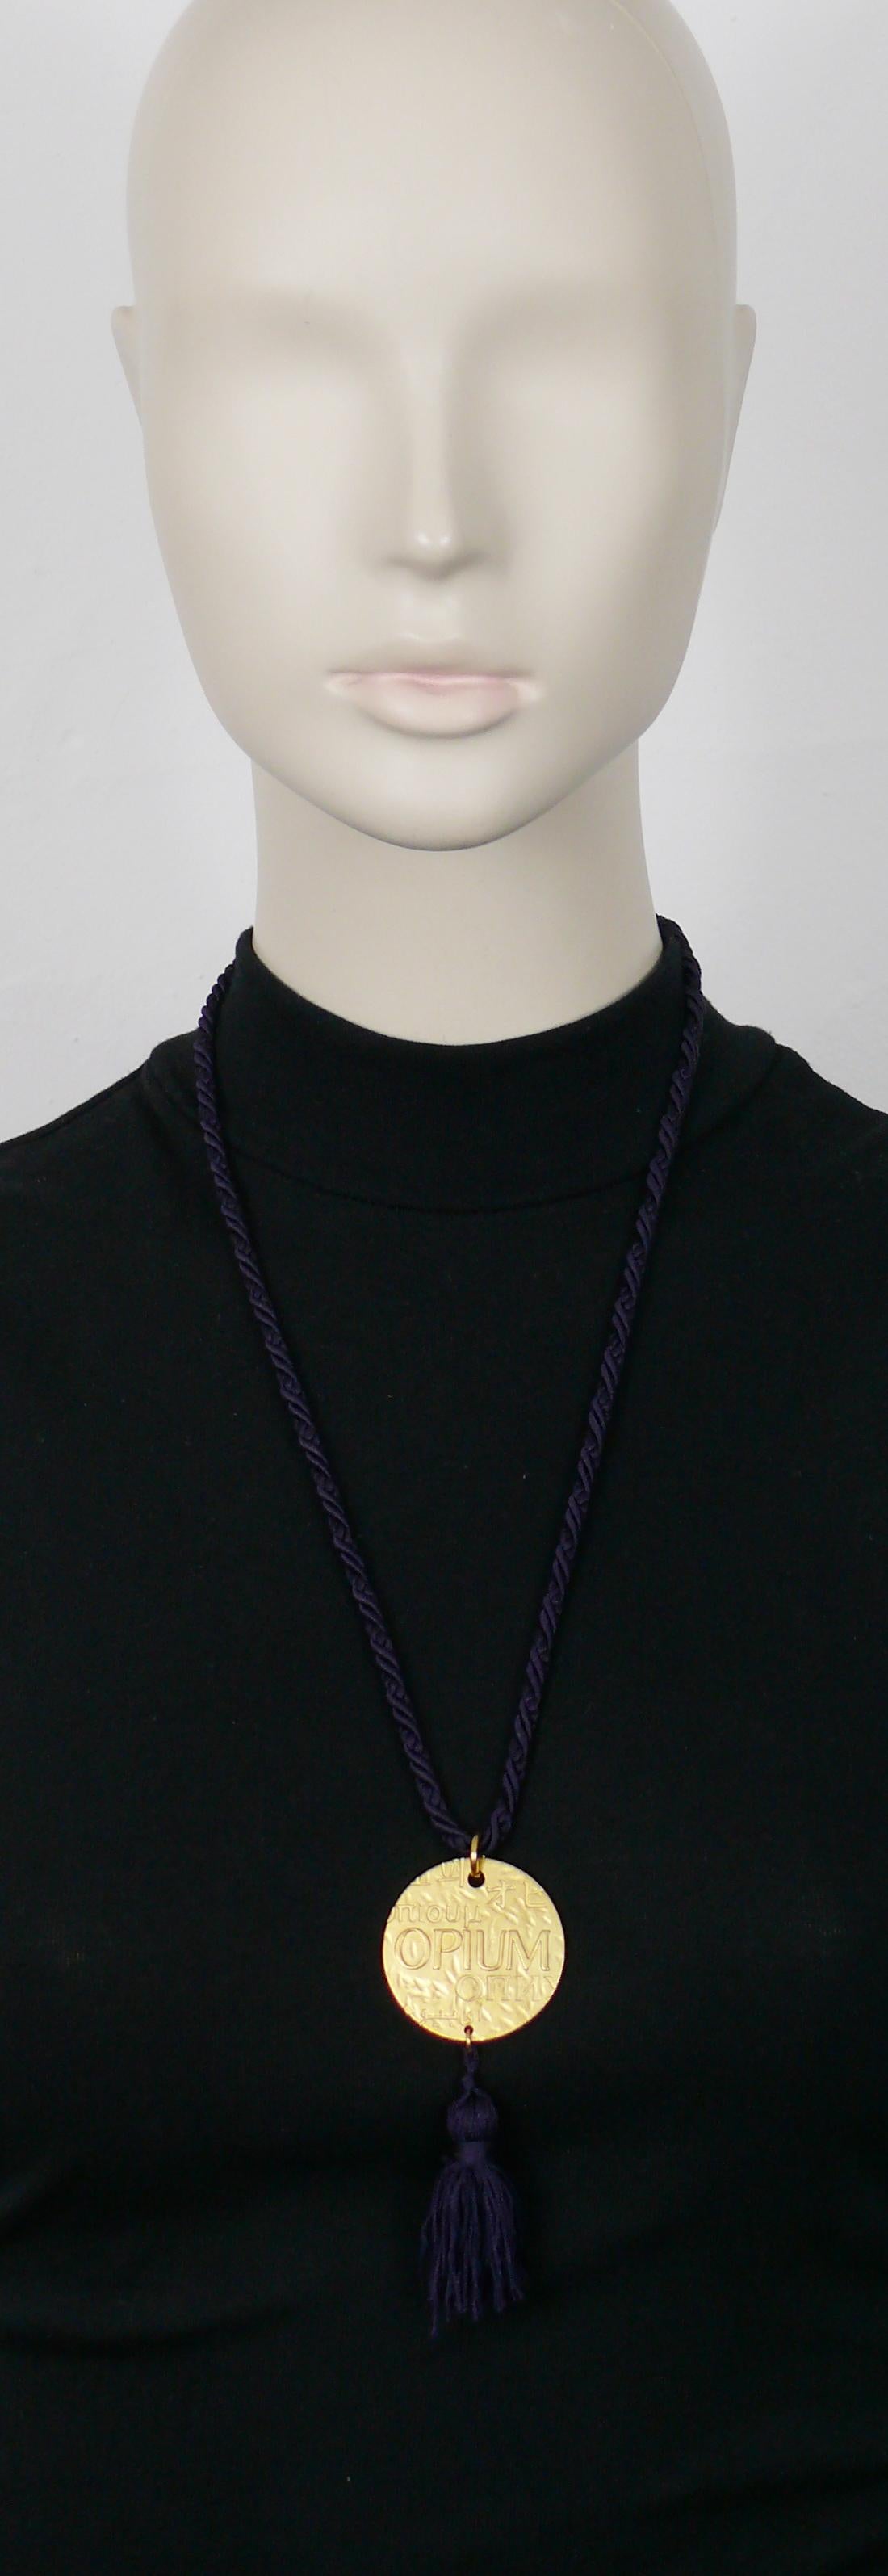 YVES SAINT LAURENT vintage OPIUM medallion pendant necklace. Purple passementerie rope and tassel.

Marked YSL Made in France.

Indicative measurements : length worn (including the tassel) approx. 37.5 cm (14.76 inches) / pendant diameter approx.